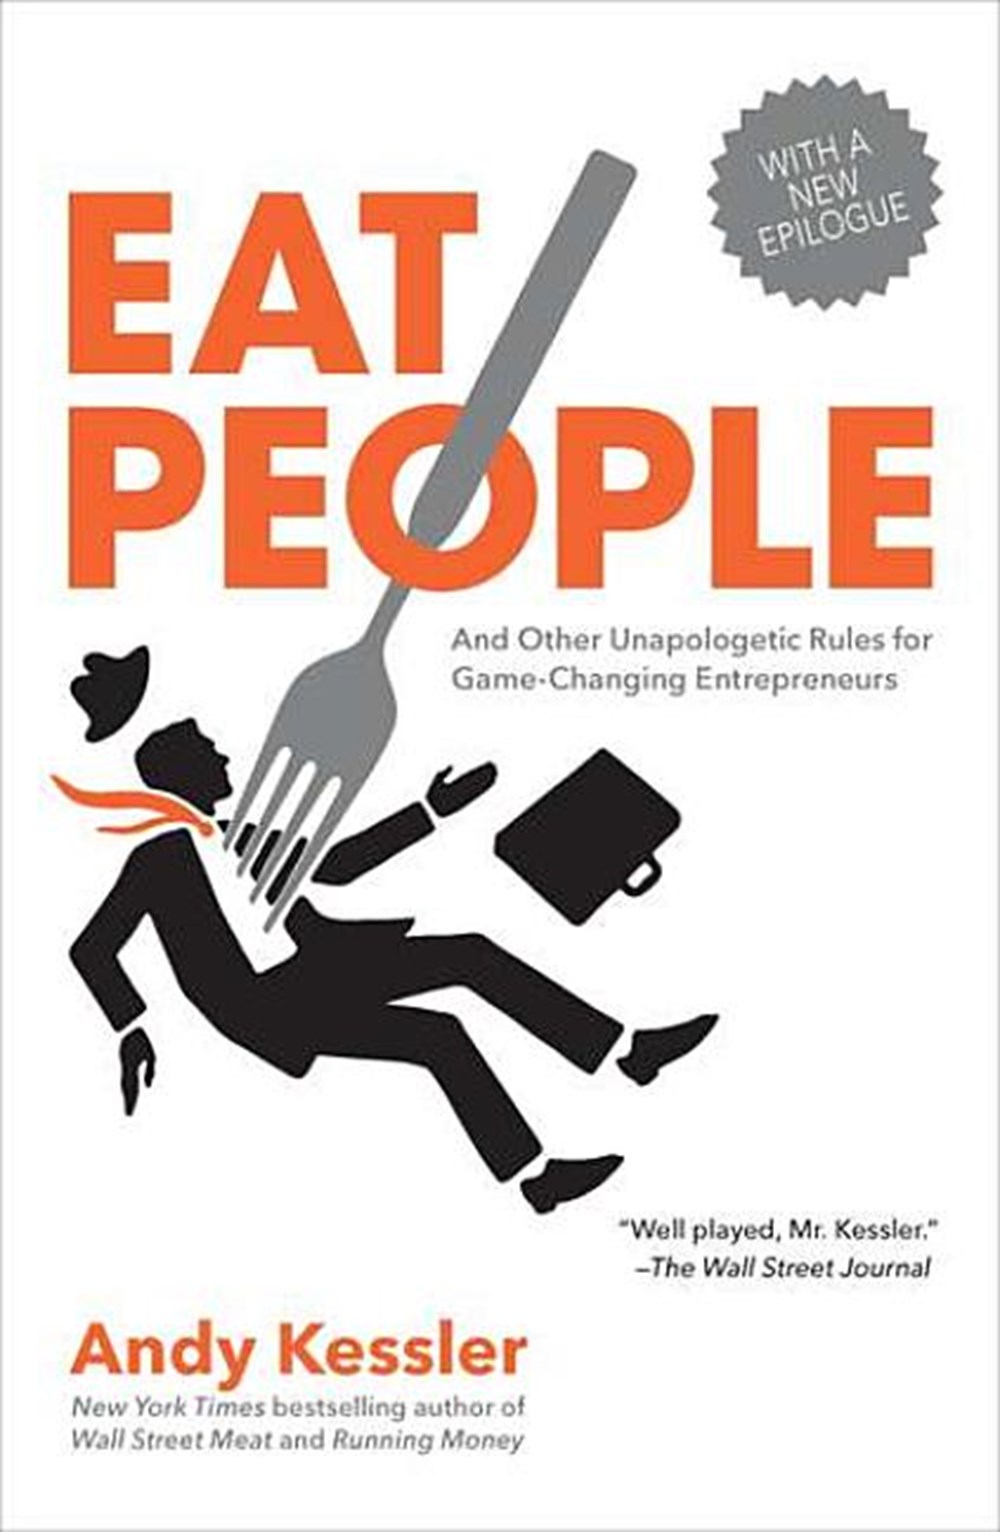 Eat People And Other Unapologetic Rules for Game-Changing Entrepreneurs